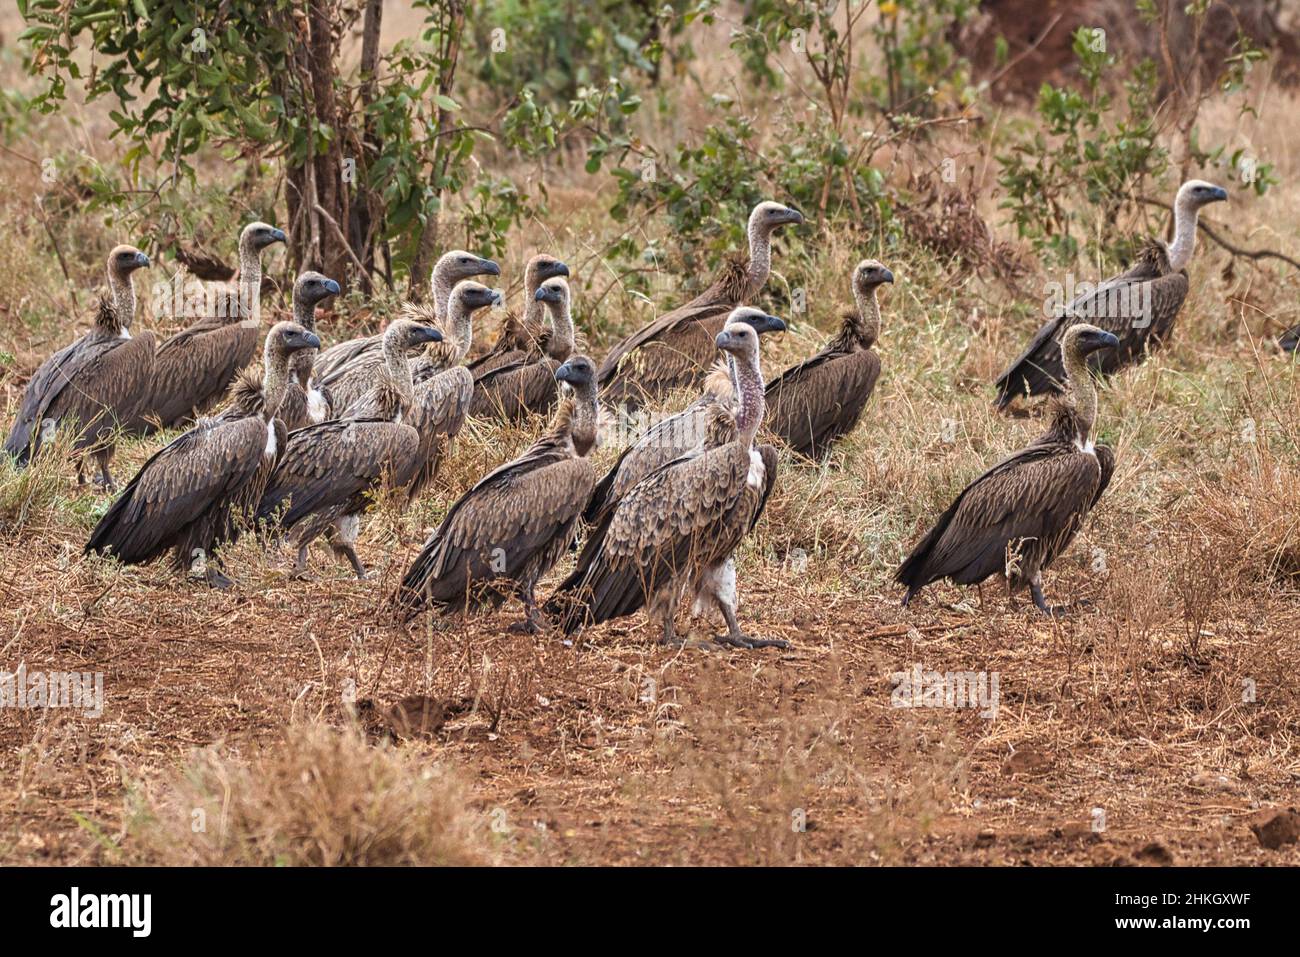 Swarm of Rüppell's vultures, Gyps rueppelli, in the Meru National Park in Kenya. Stock Photo